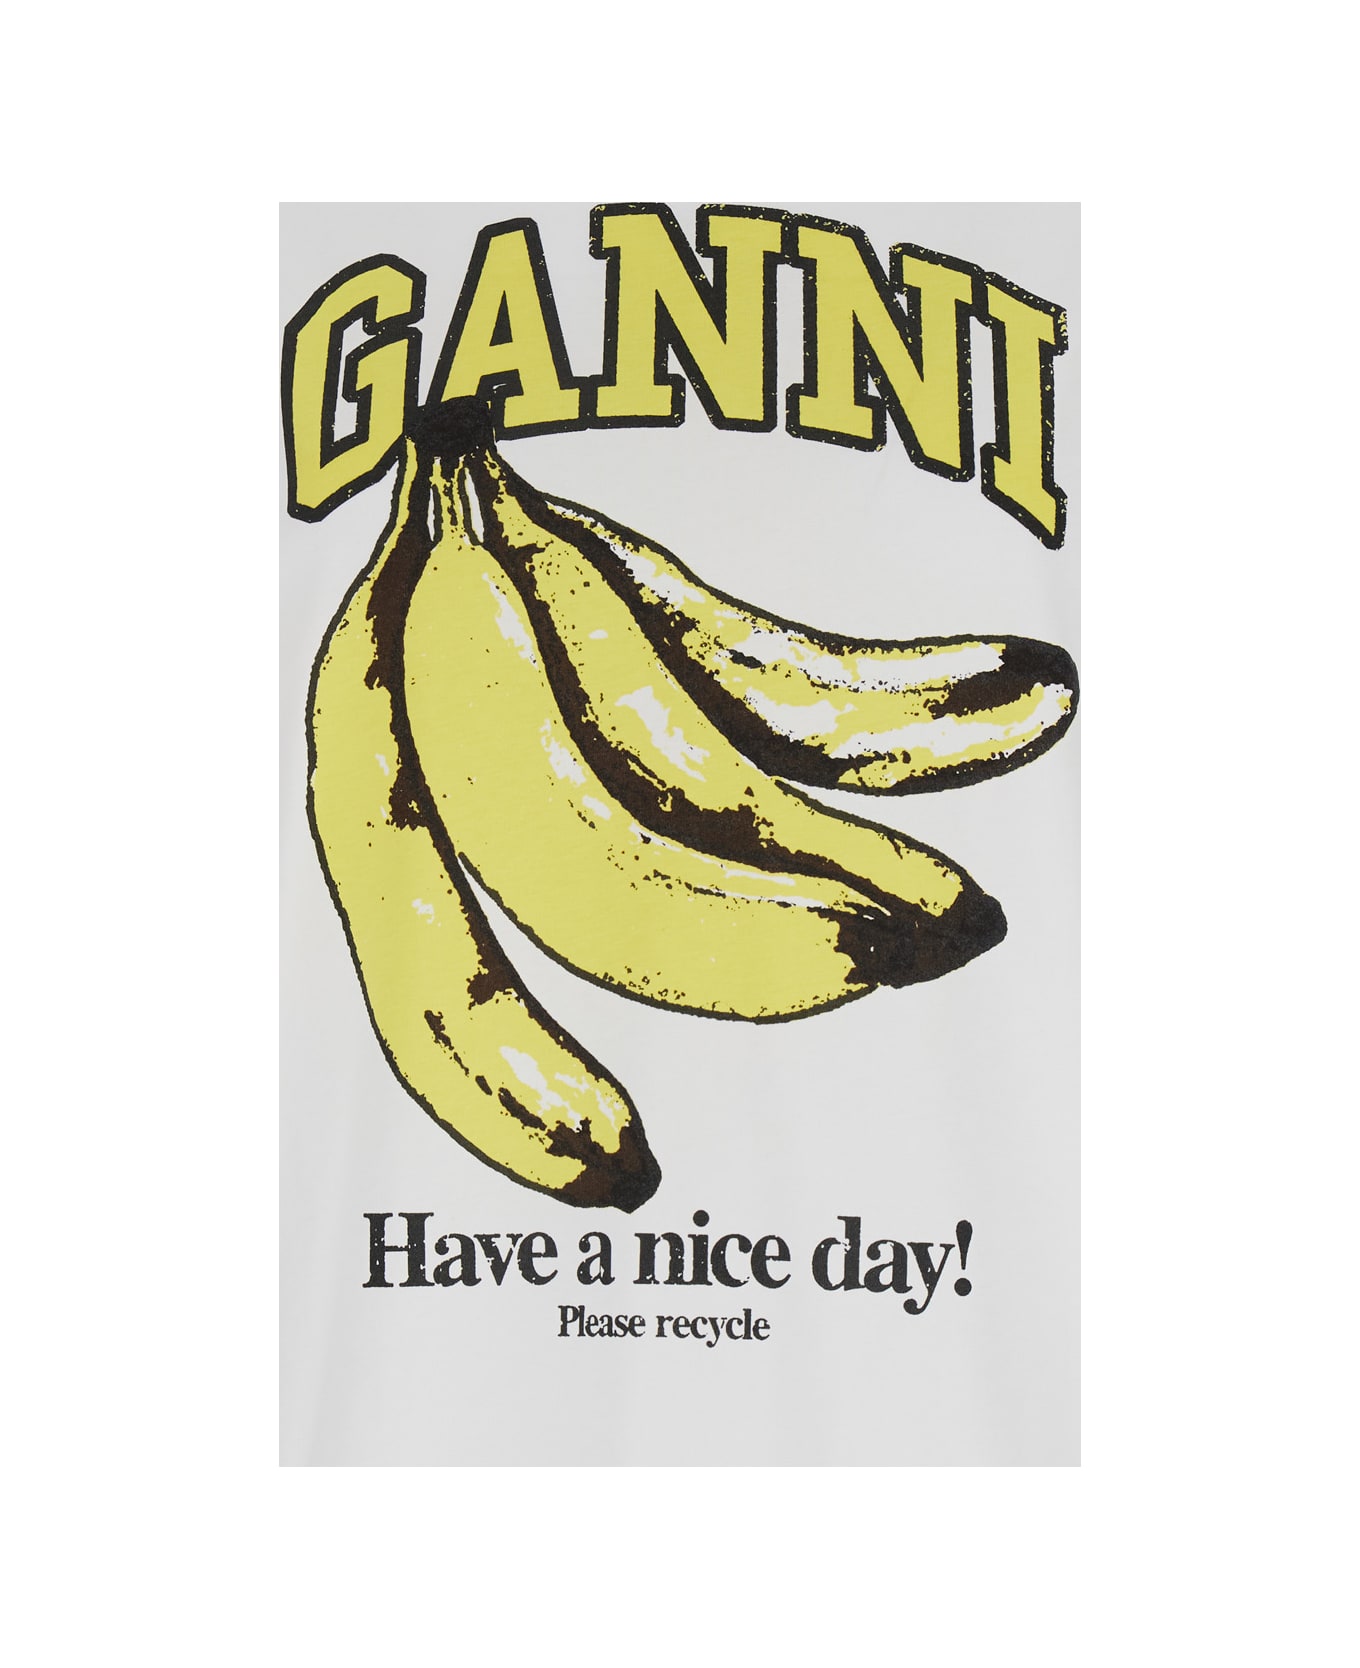 Ganni White Basic Jersey Banana Relaxed T-shirt In Cotton Woman - White